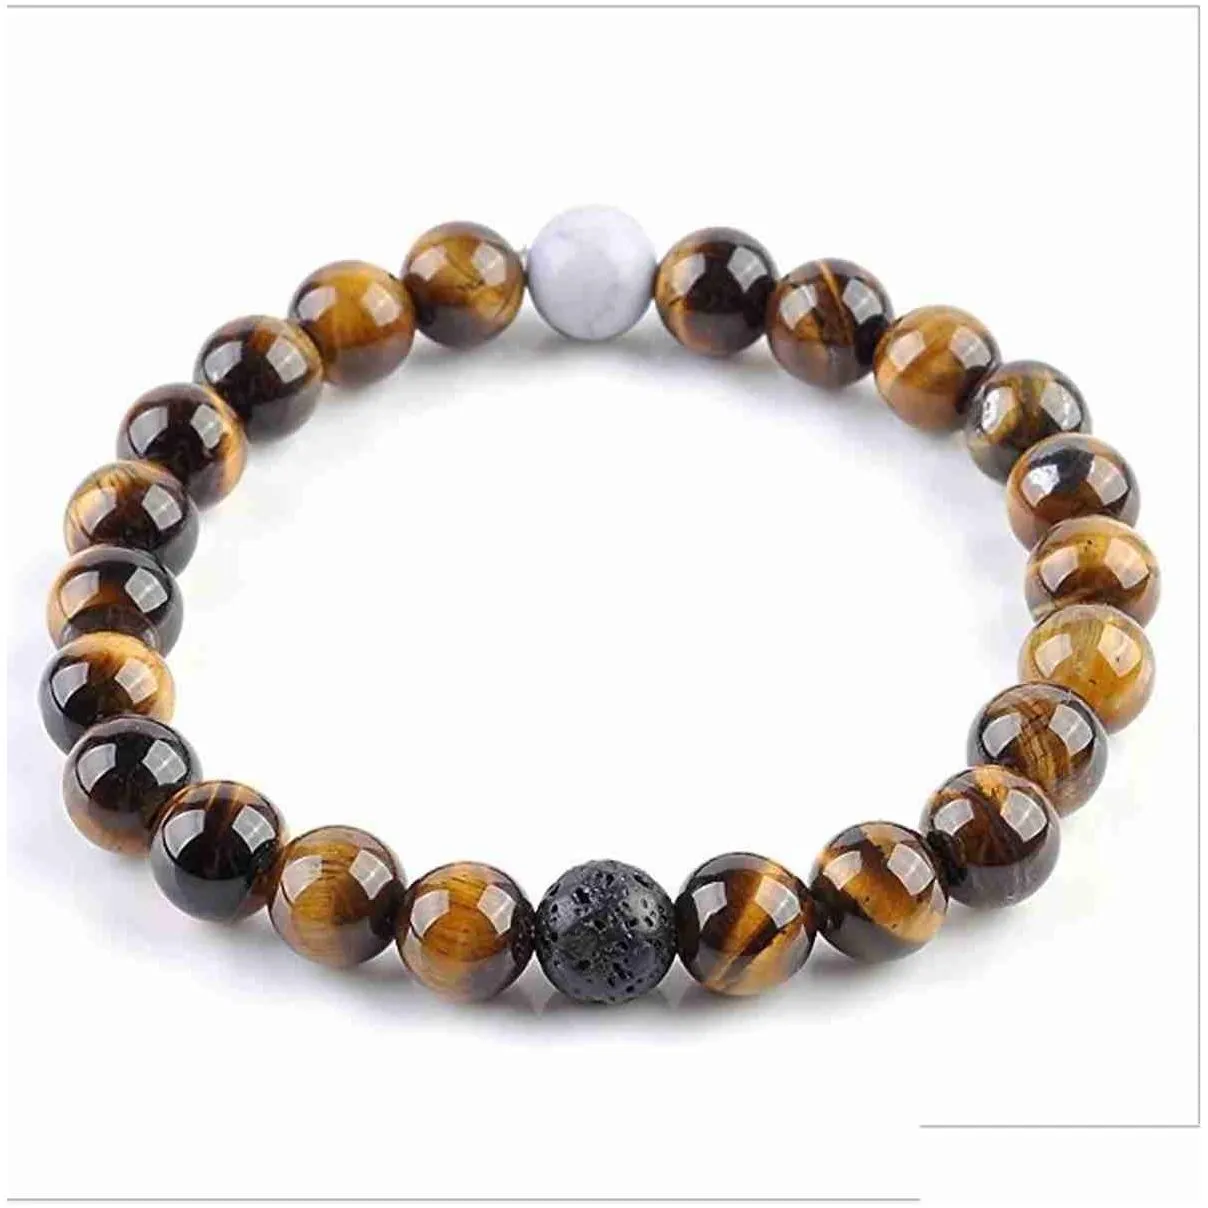 Natural stone bracelet for men and women with any two beads fashion popular wrist jewelry